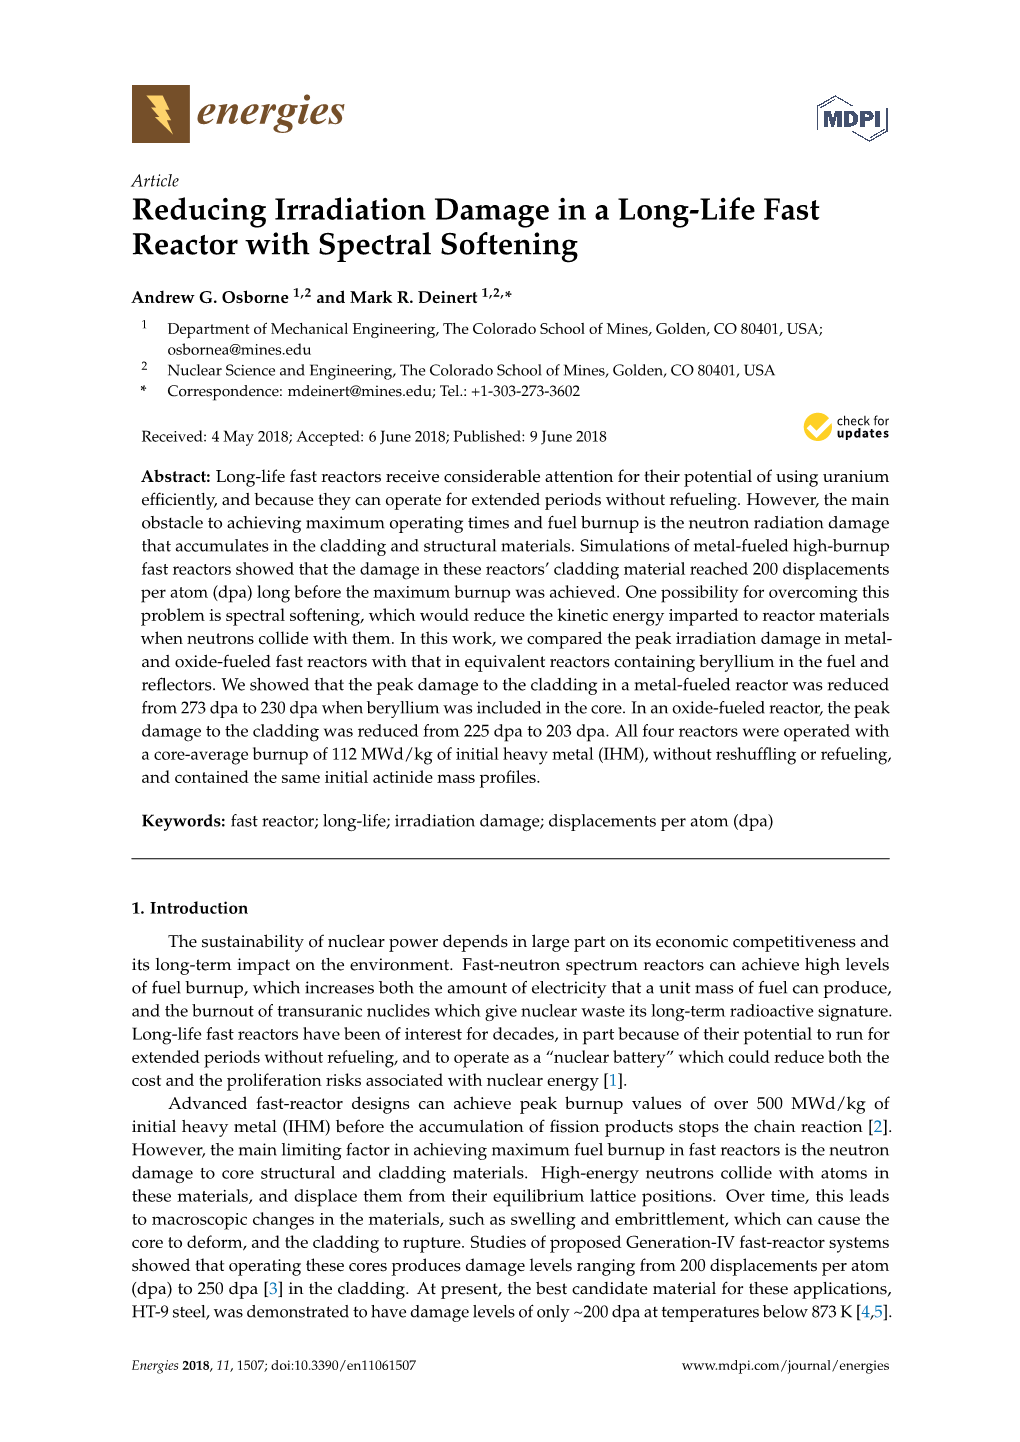 Reducing Irradiation Damage in a Long-Life Fast Reactor with Spectral Softening